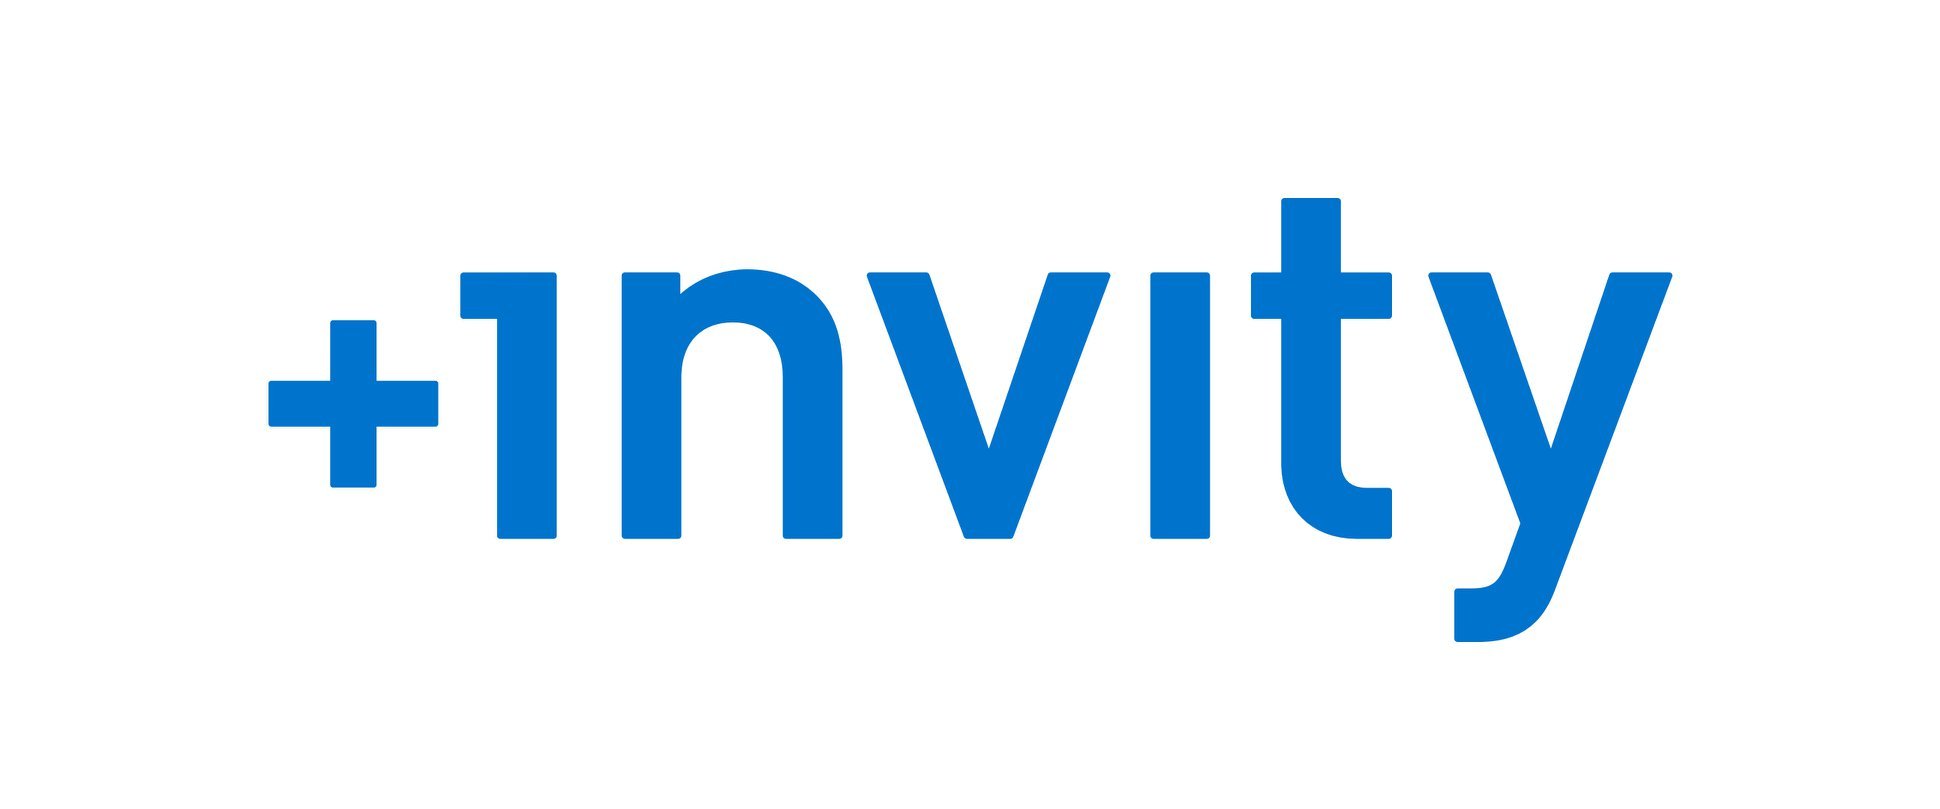 Buy Bitcoin instantly with credit / debit card | Invity.io. Compare rates and buy cryptocurrency instantly with debit card, credit card, bank transfer, or local methods from anywhere. Invest in Bitcoin with Invity.